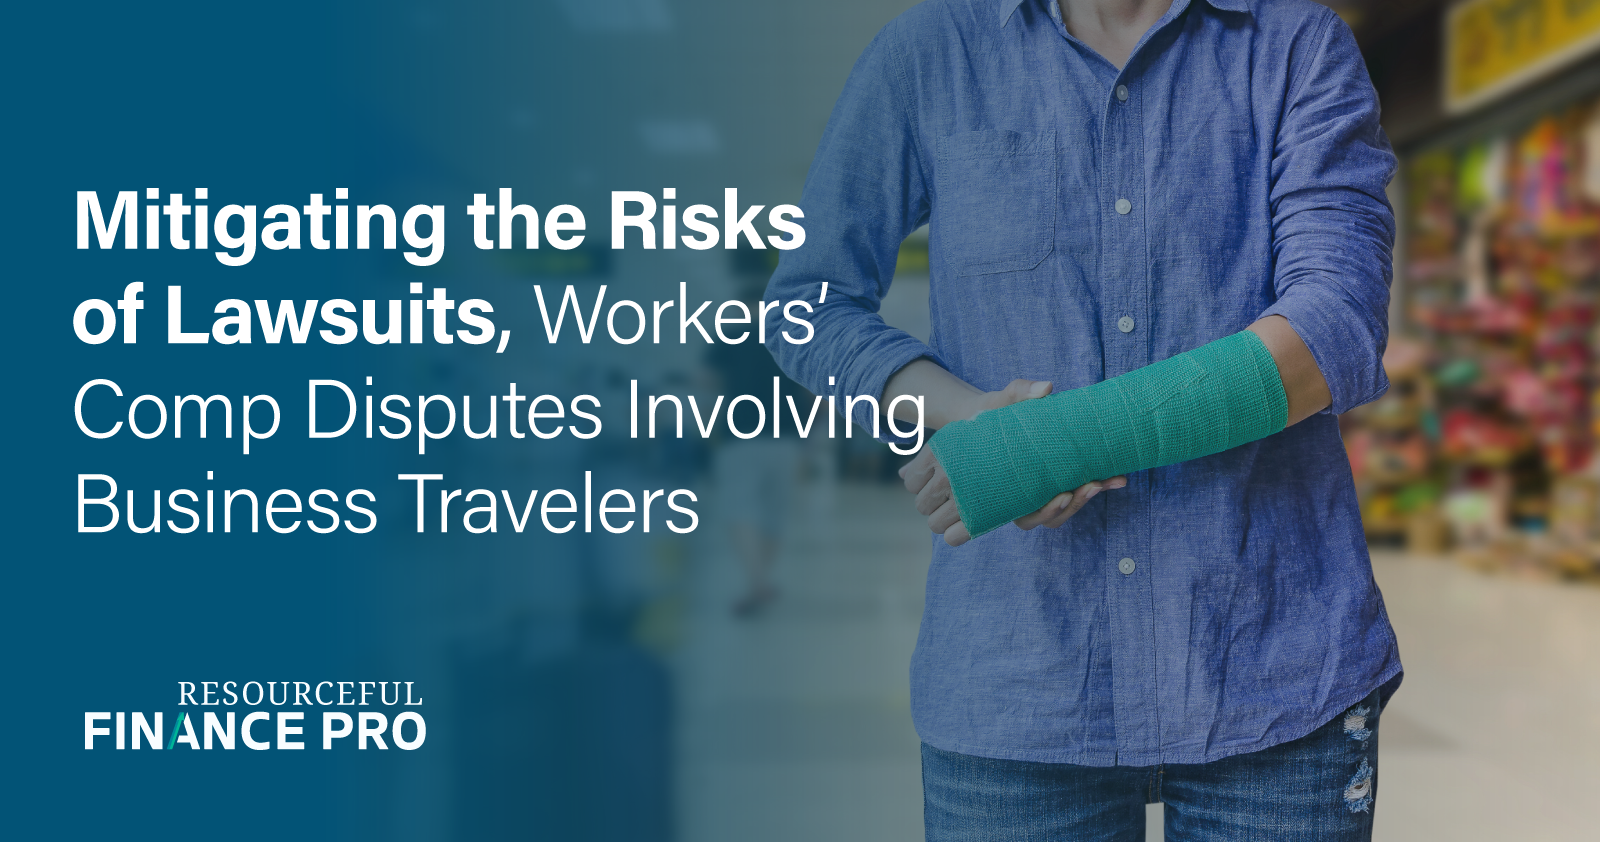 Mitigating the risks of lawsuits, workers' comp disputes involving business travelers